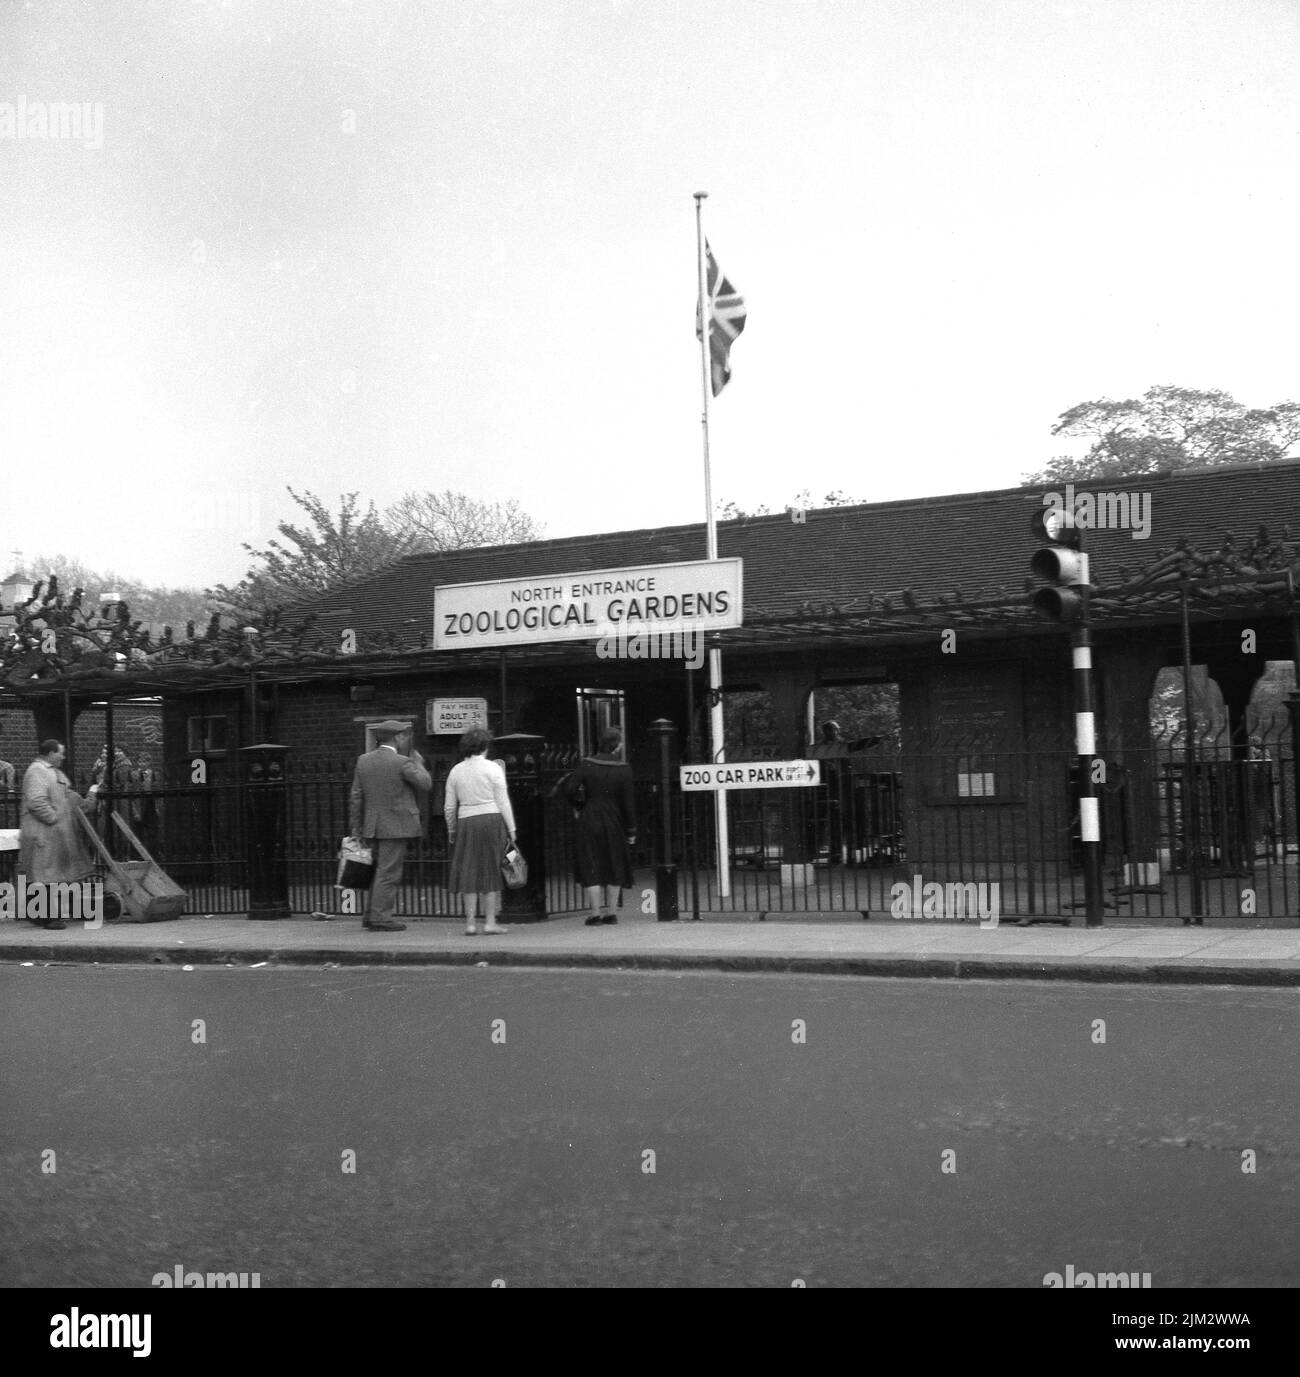 1960s, historical view of the North Entrance to the Zoological Gardens or as it is more commonly known, London Zoo, at Regent Park, London, England, UK. Entry fee for audlts, 3'6 ( 3 shilings, 6 pence). The Zoo opened to the Fellows of the Zoological Society of London (ZSL) in 1828 on the edge of Regents Park and known as the zoological gardens, was originally intended to be used as a collection for scientific study. Stock Photo